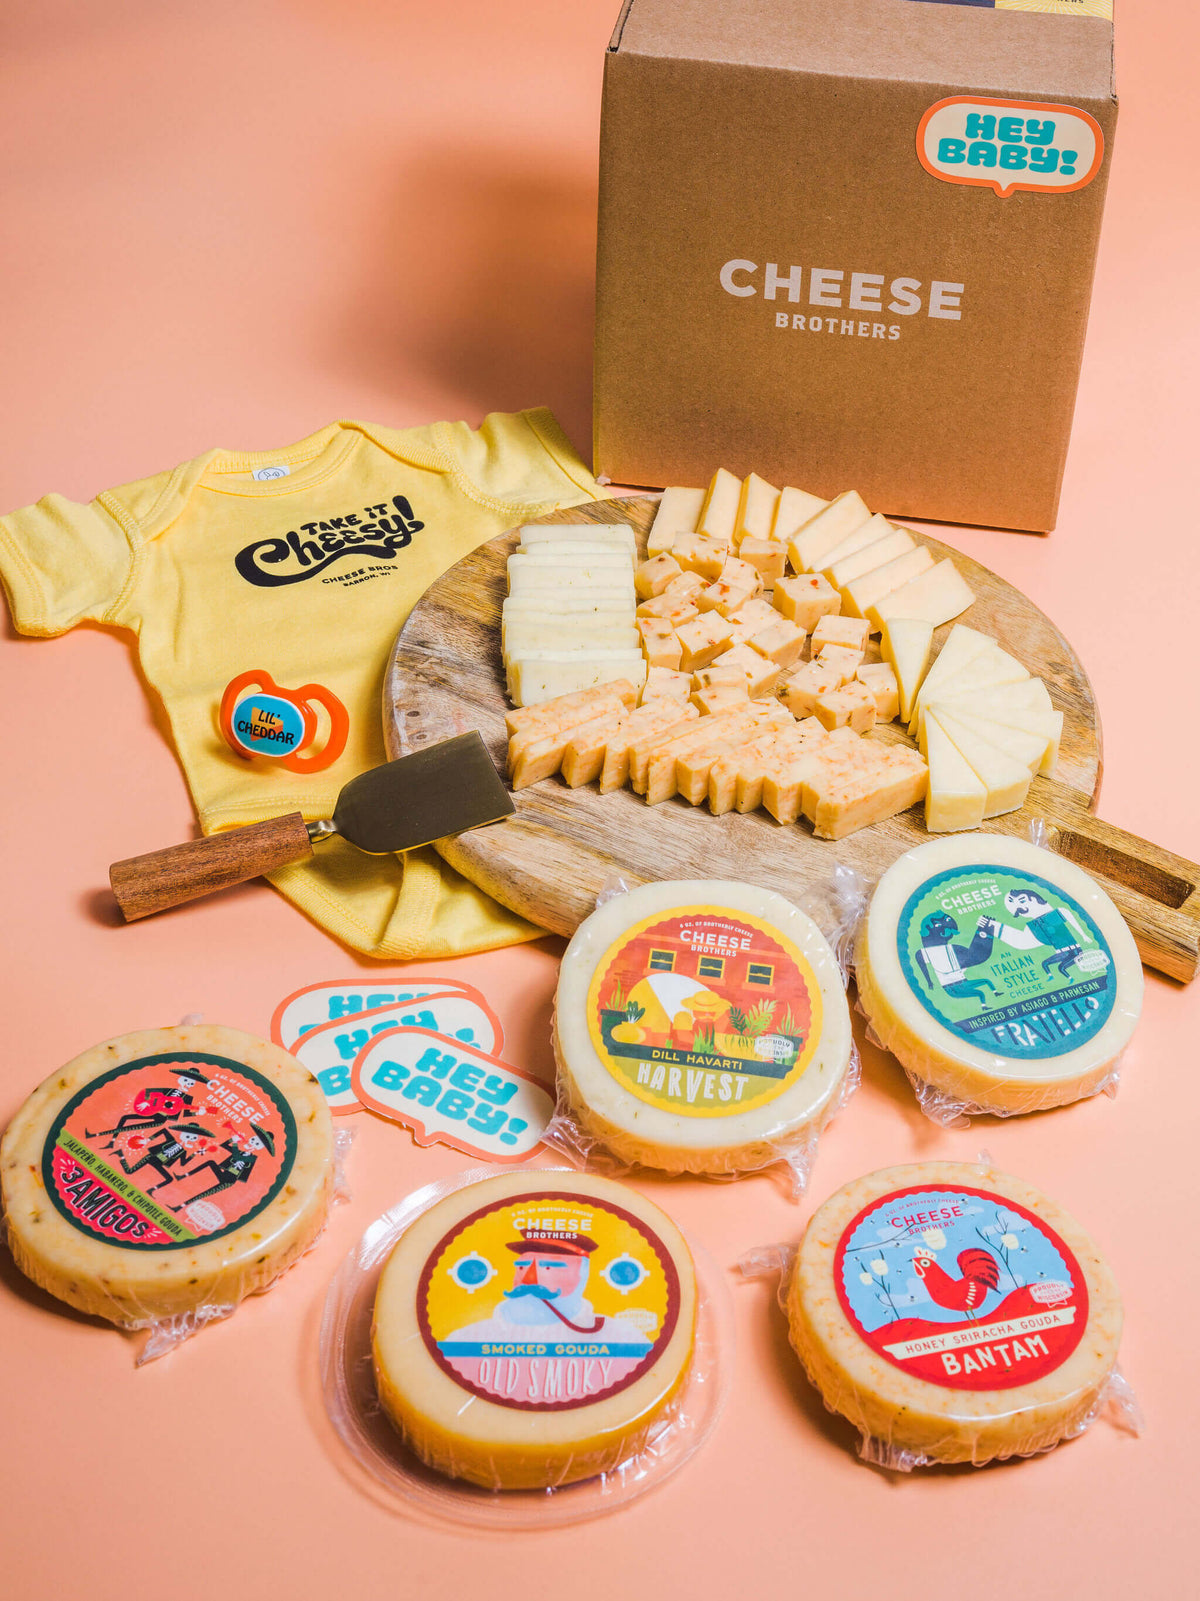 A variety of artisan cheese packages, a charcuterie board, Cheese Brothers baby onesie, and delivery box.  